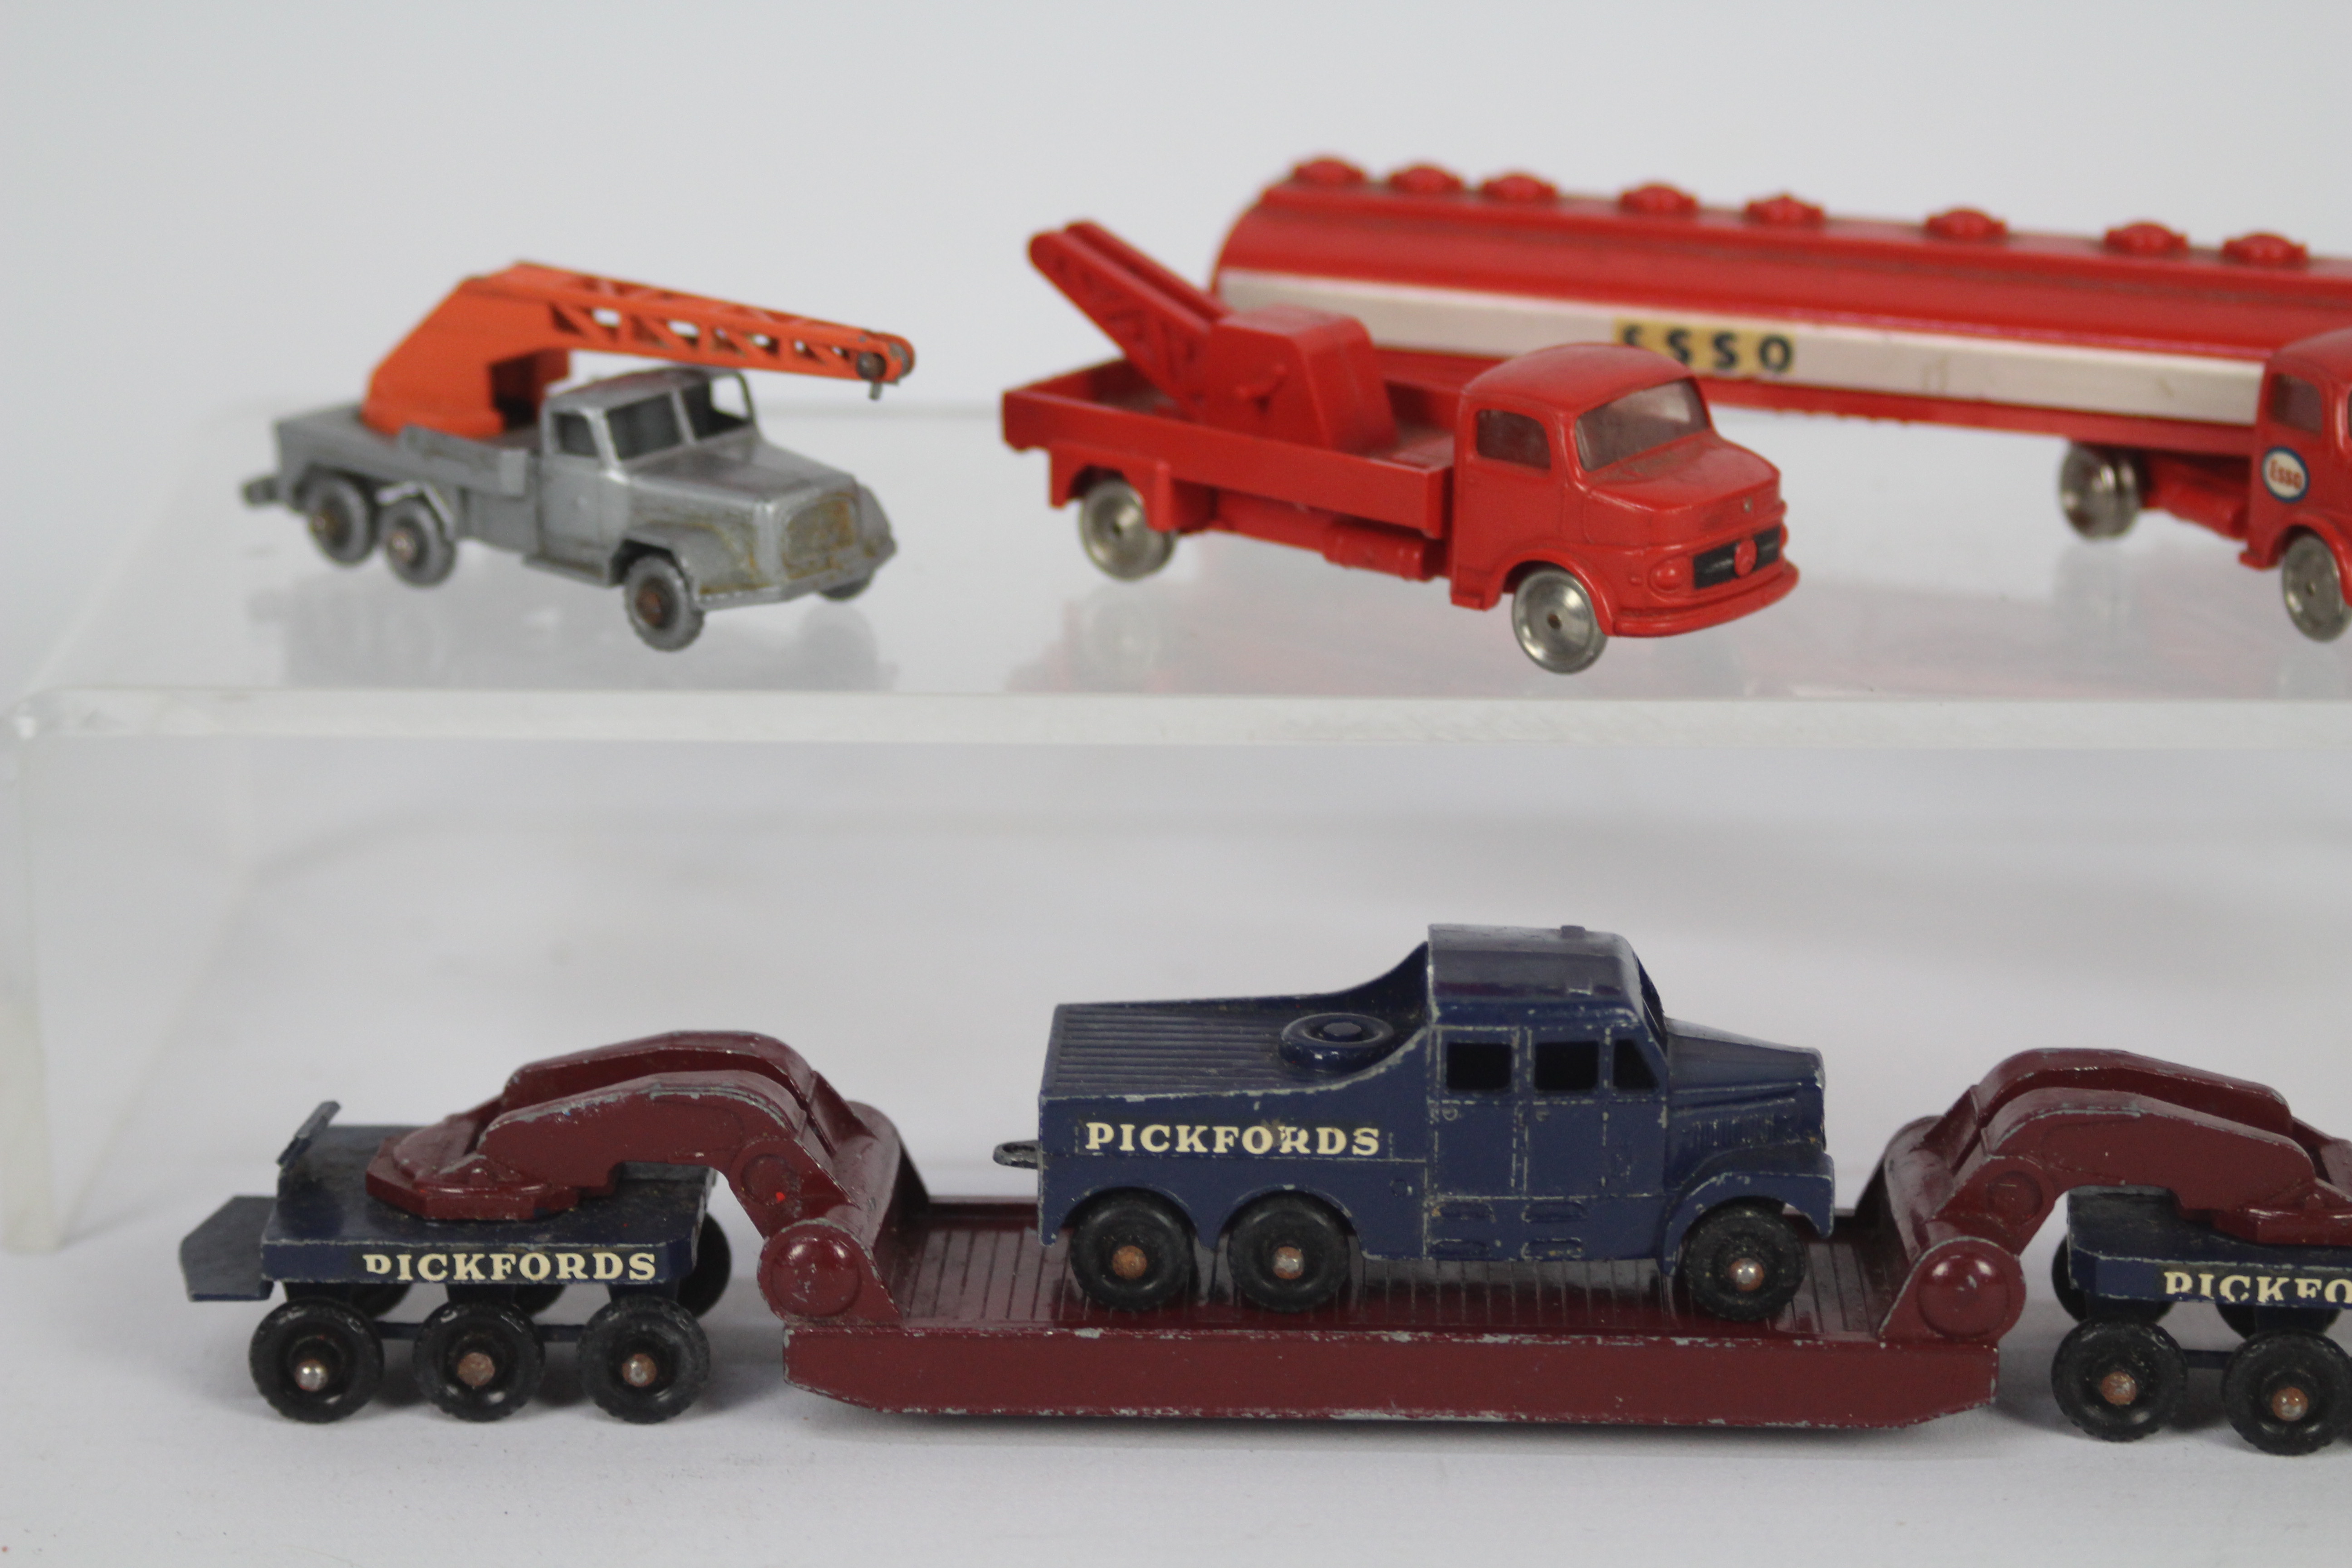 Lego - Matchbox - 4 x vehicles including two rare mid 1960s Lego Mercedes Benz trucks, - Image 3 of 3